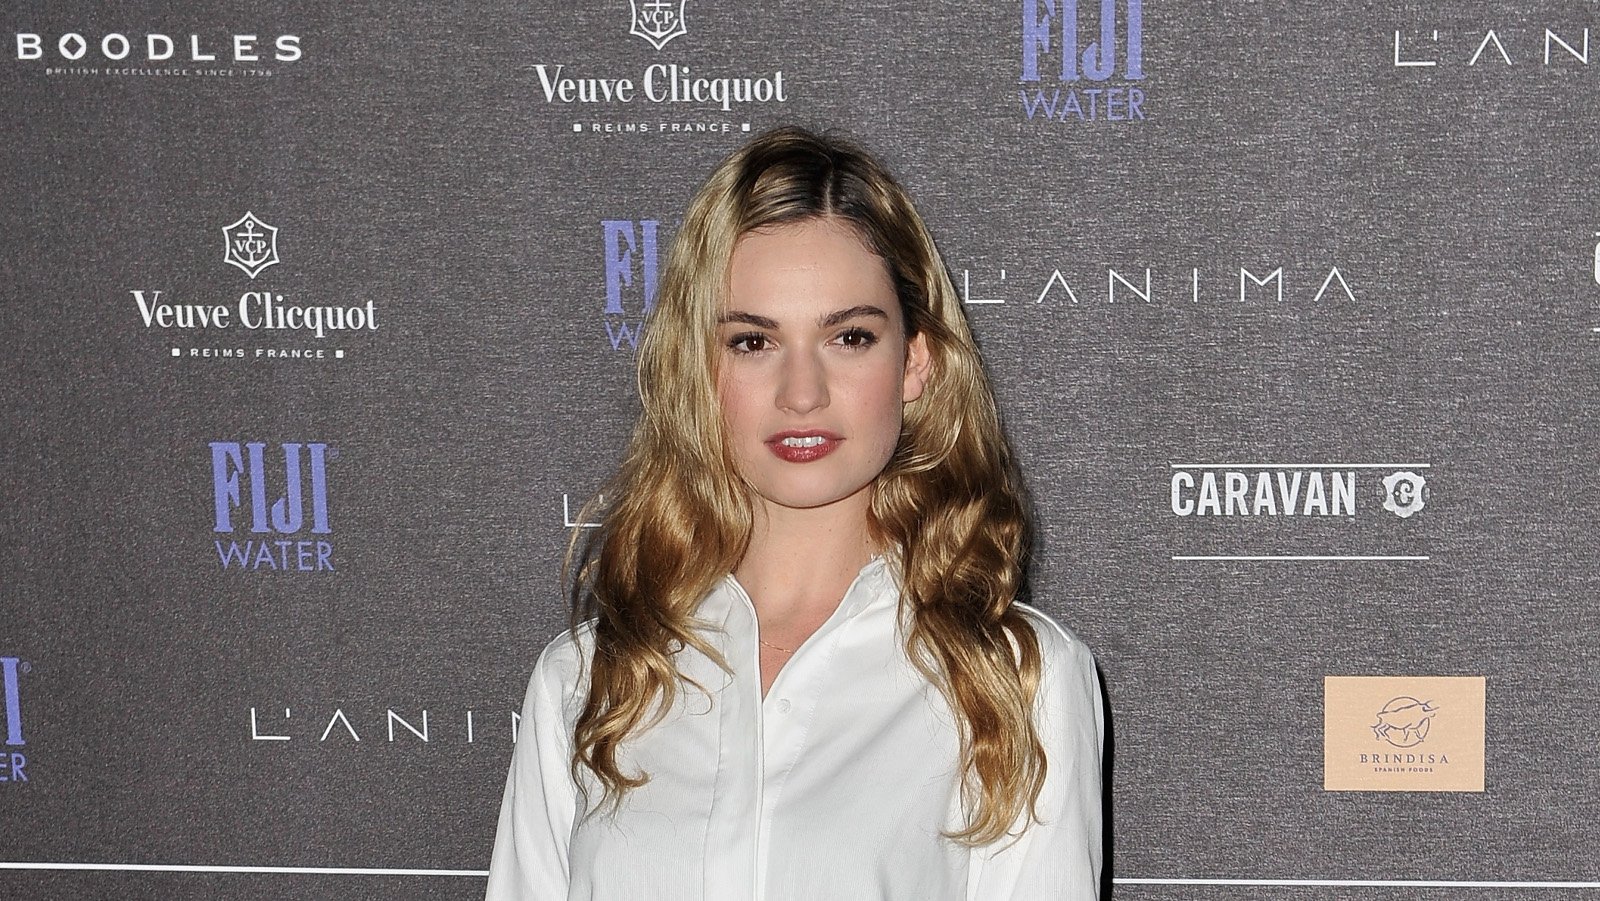 Downton Abbey' Actress Lily James to Star in Disney's 'Cinderella